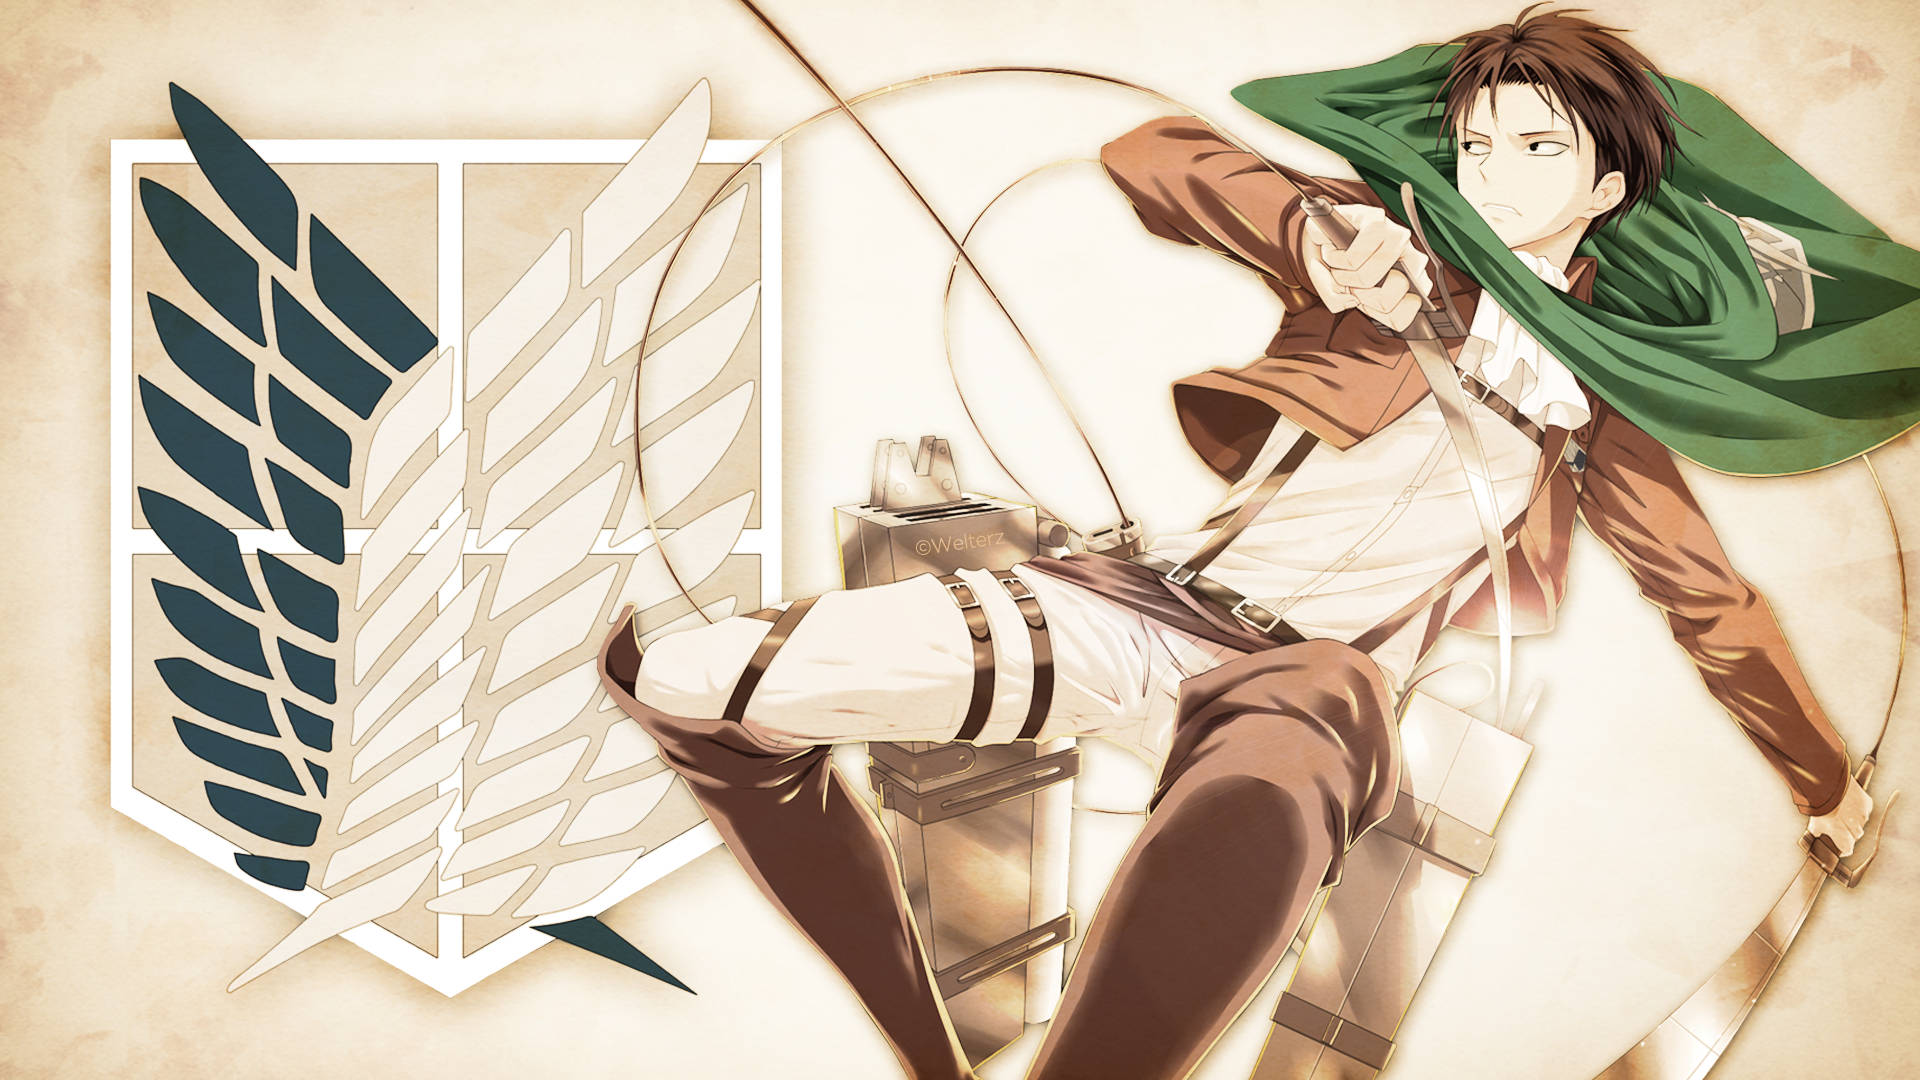 Brave, Determined And Devoted - Levi Of The Scouting Legion